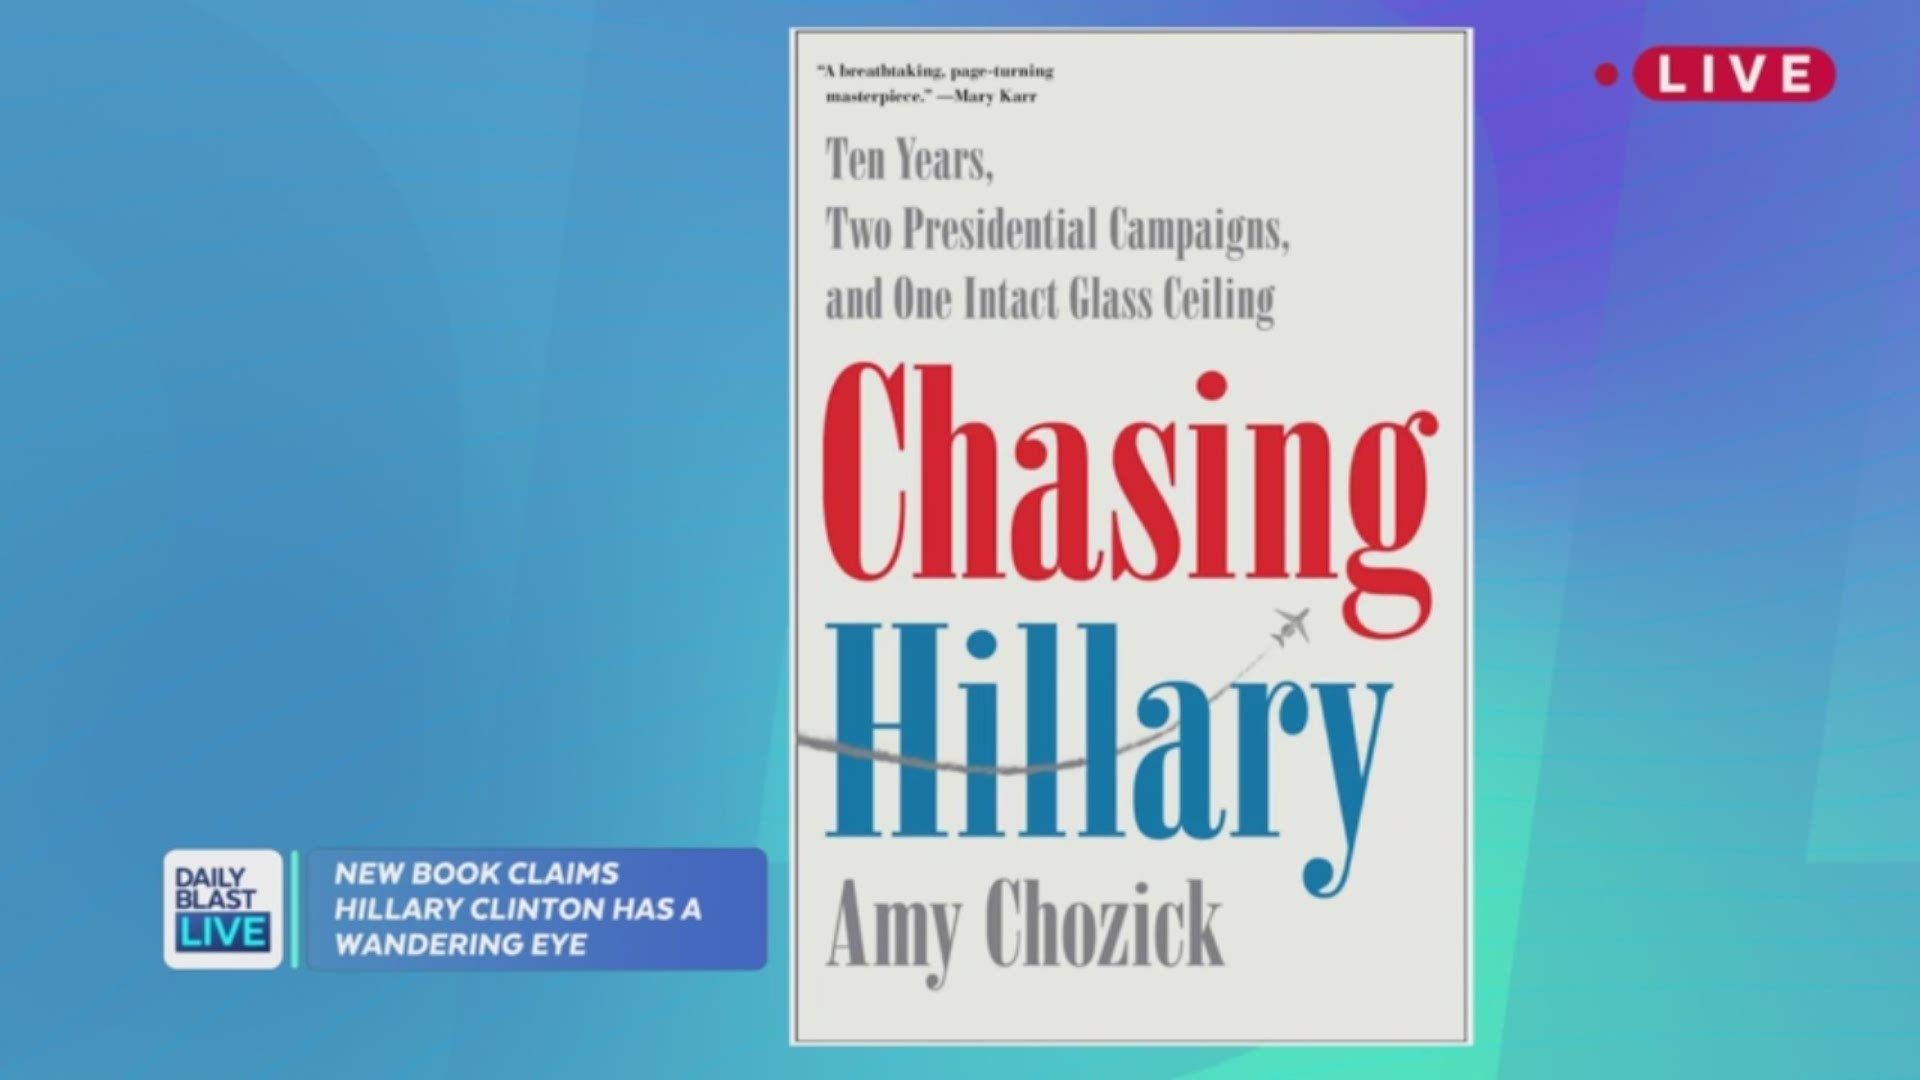 Move over Bill because Hillary Clinton is being chased...at least in a literary sense. Author Amy Chozick was a New York Times reporter covering the Clinton campaign during the 2016 presidential election. In her new book, "Chasing Hillary," Chozick claims